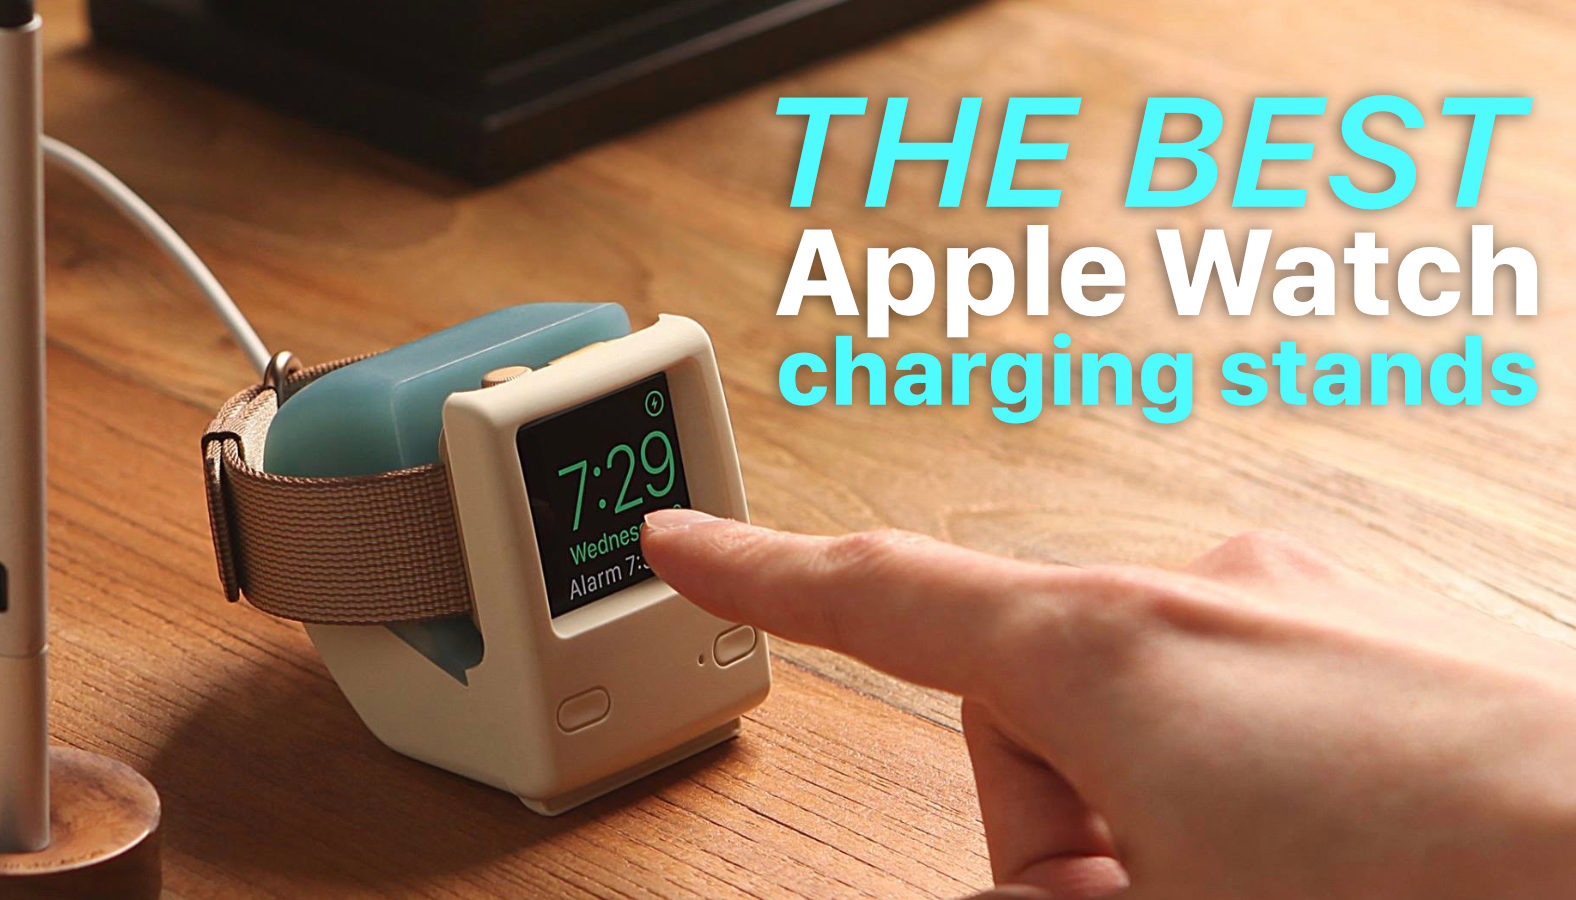 This brilliant stand from Elago is one of many on our list of best Apple Watch charging stands.